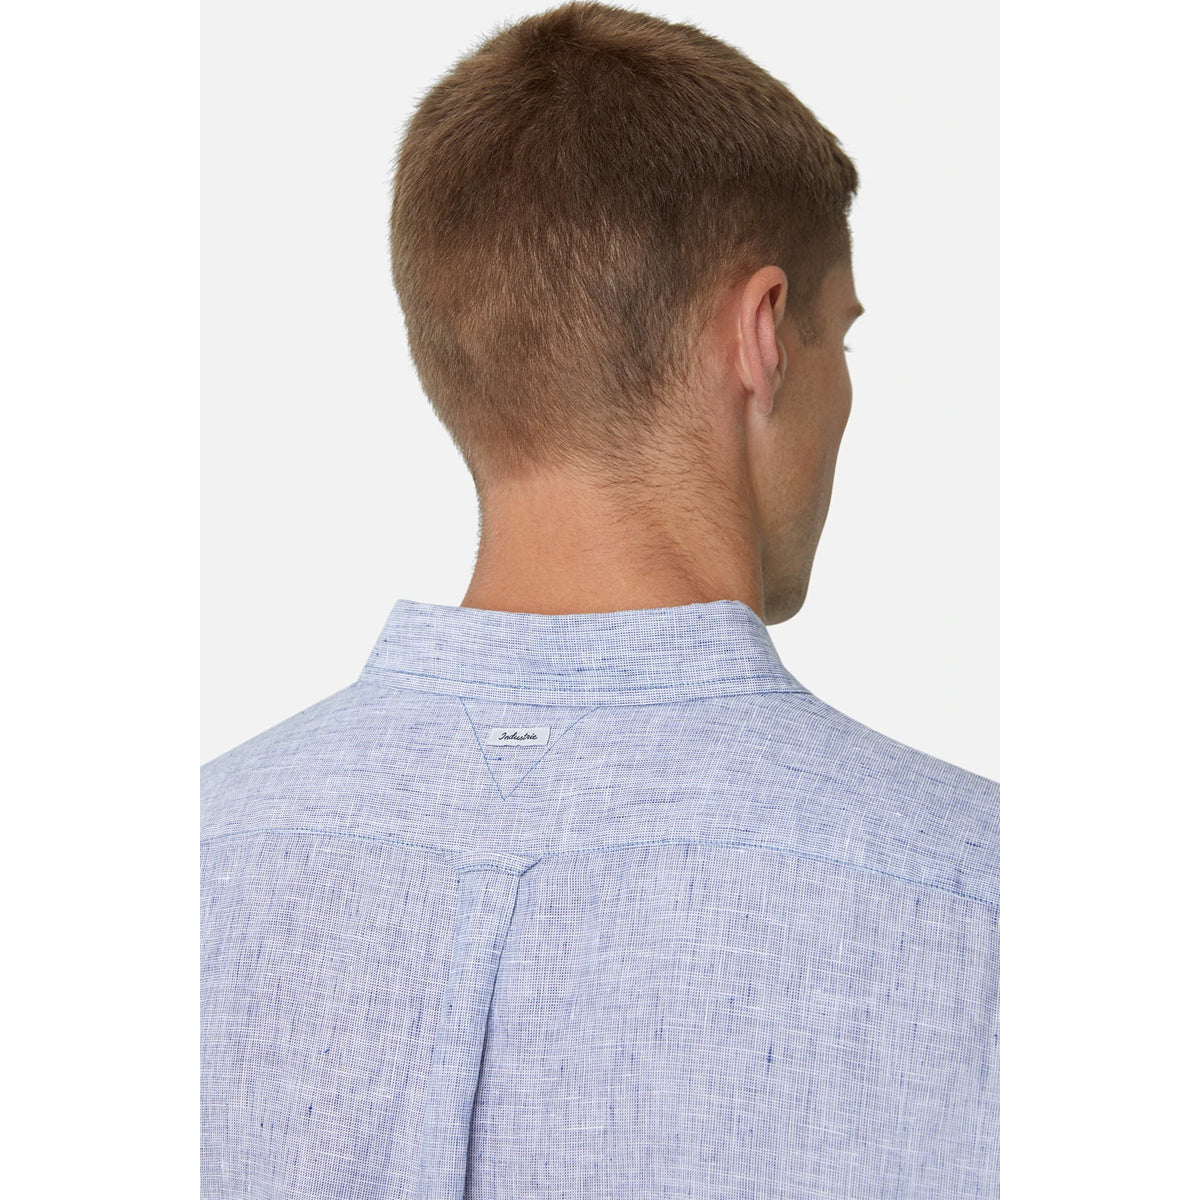 The Newry S/S Shirt